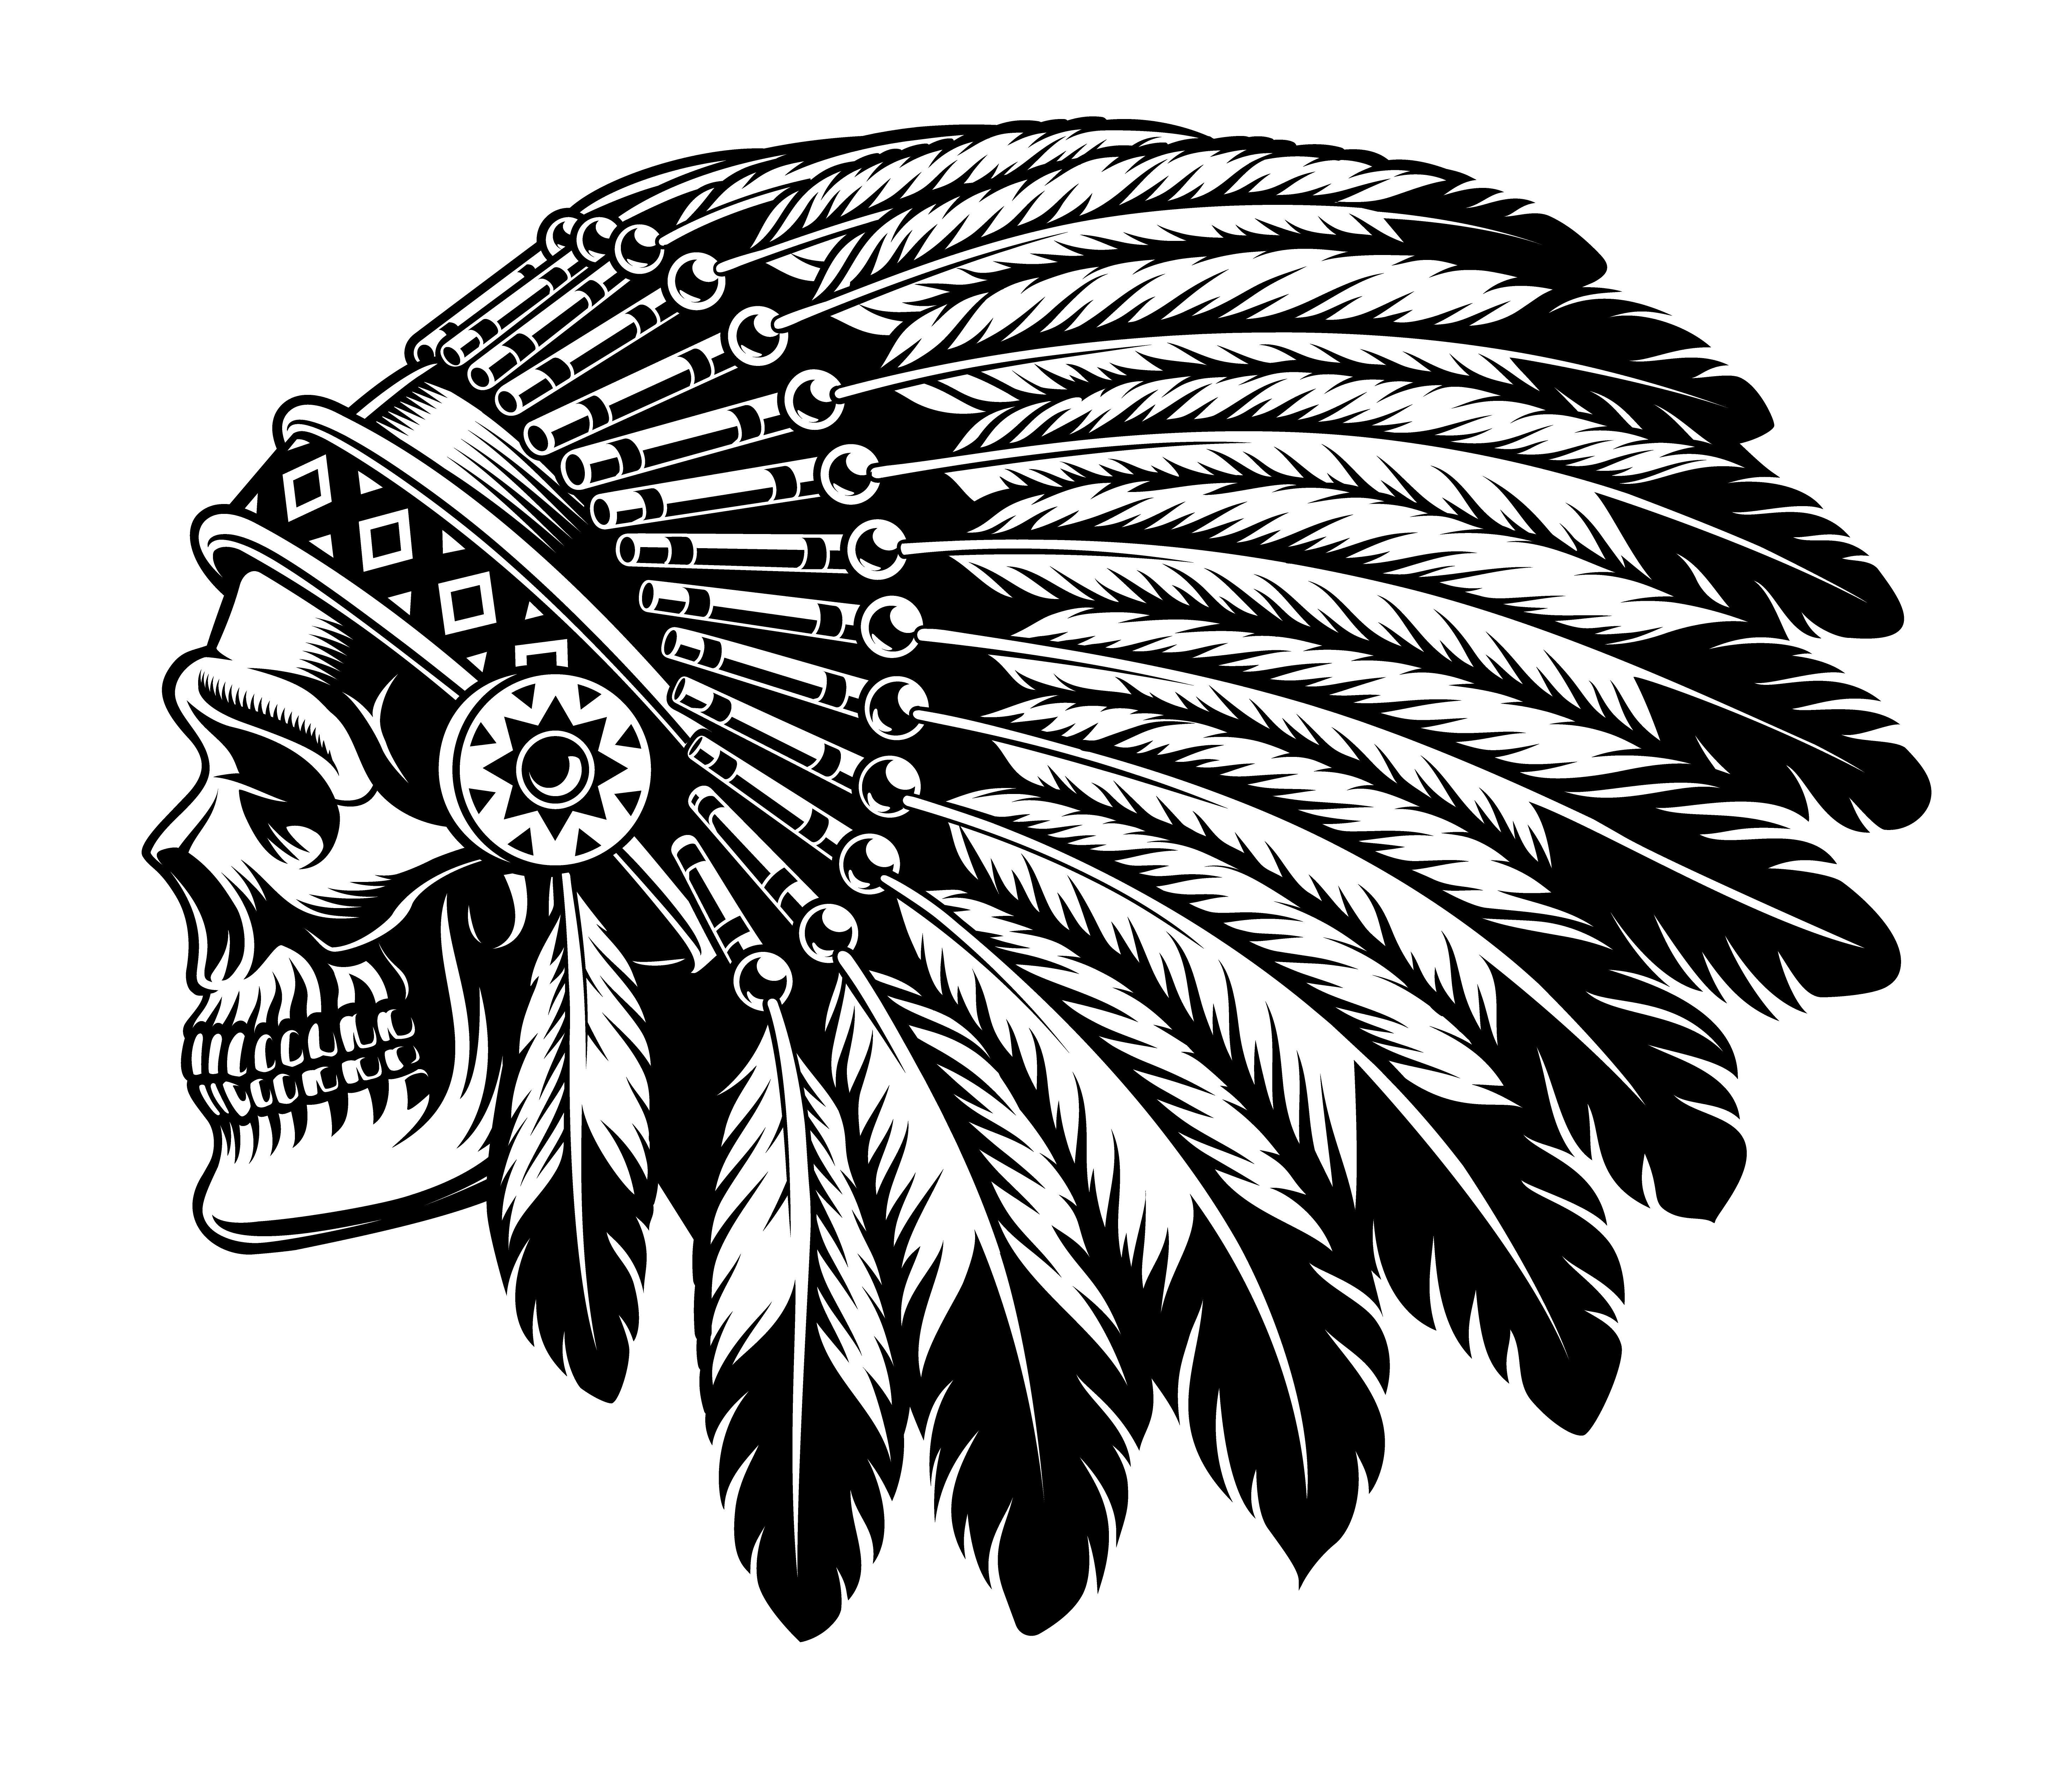 Download Black and white illustration of an Indian skull. - Download Free Vectors, Clipart Graphics ...